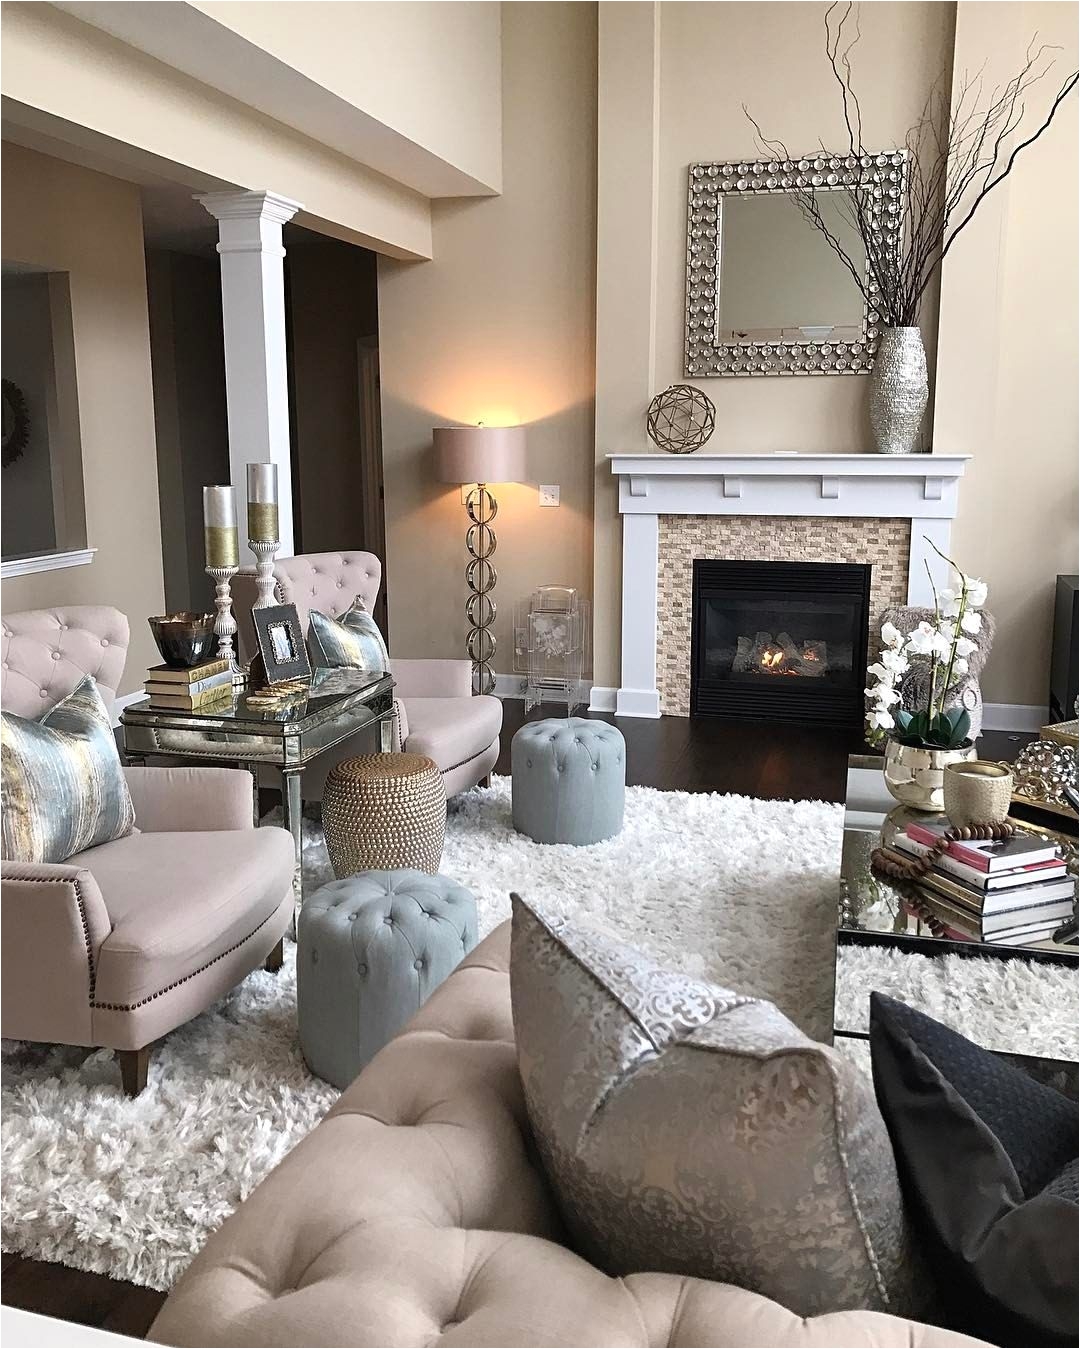 69 2k likes 392 comments interior design home decor inspire me home decor on instagram made some updates in my family room check out the other